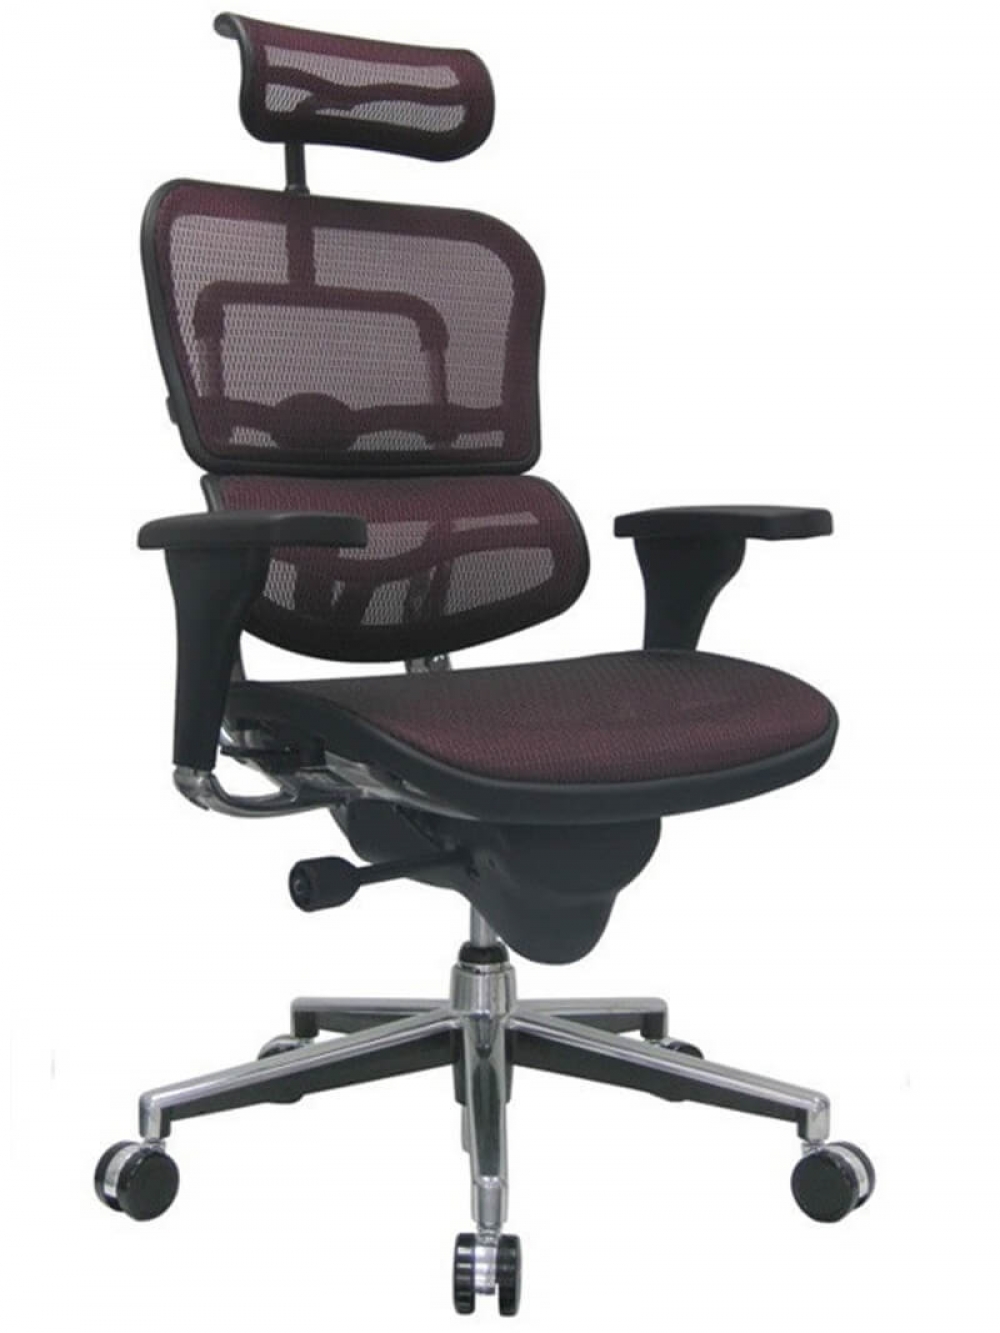 Executive chairs and conference chairs cub me7erg km 12 eur